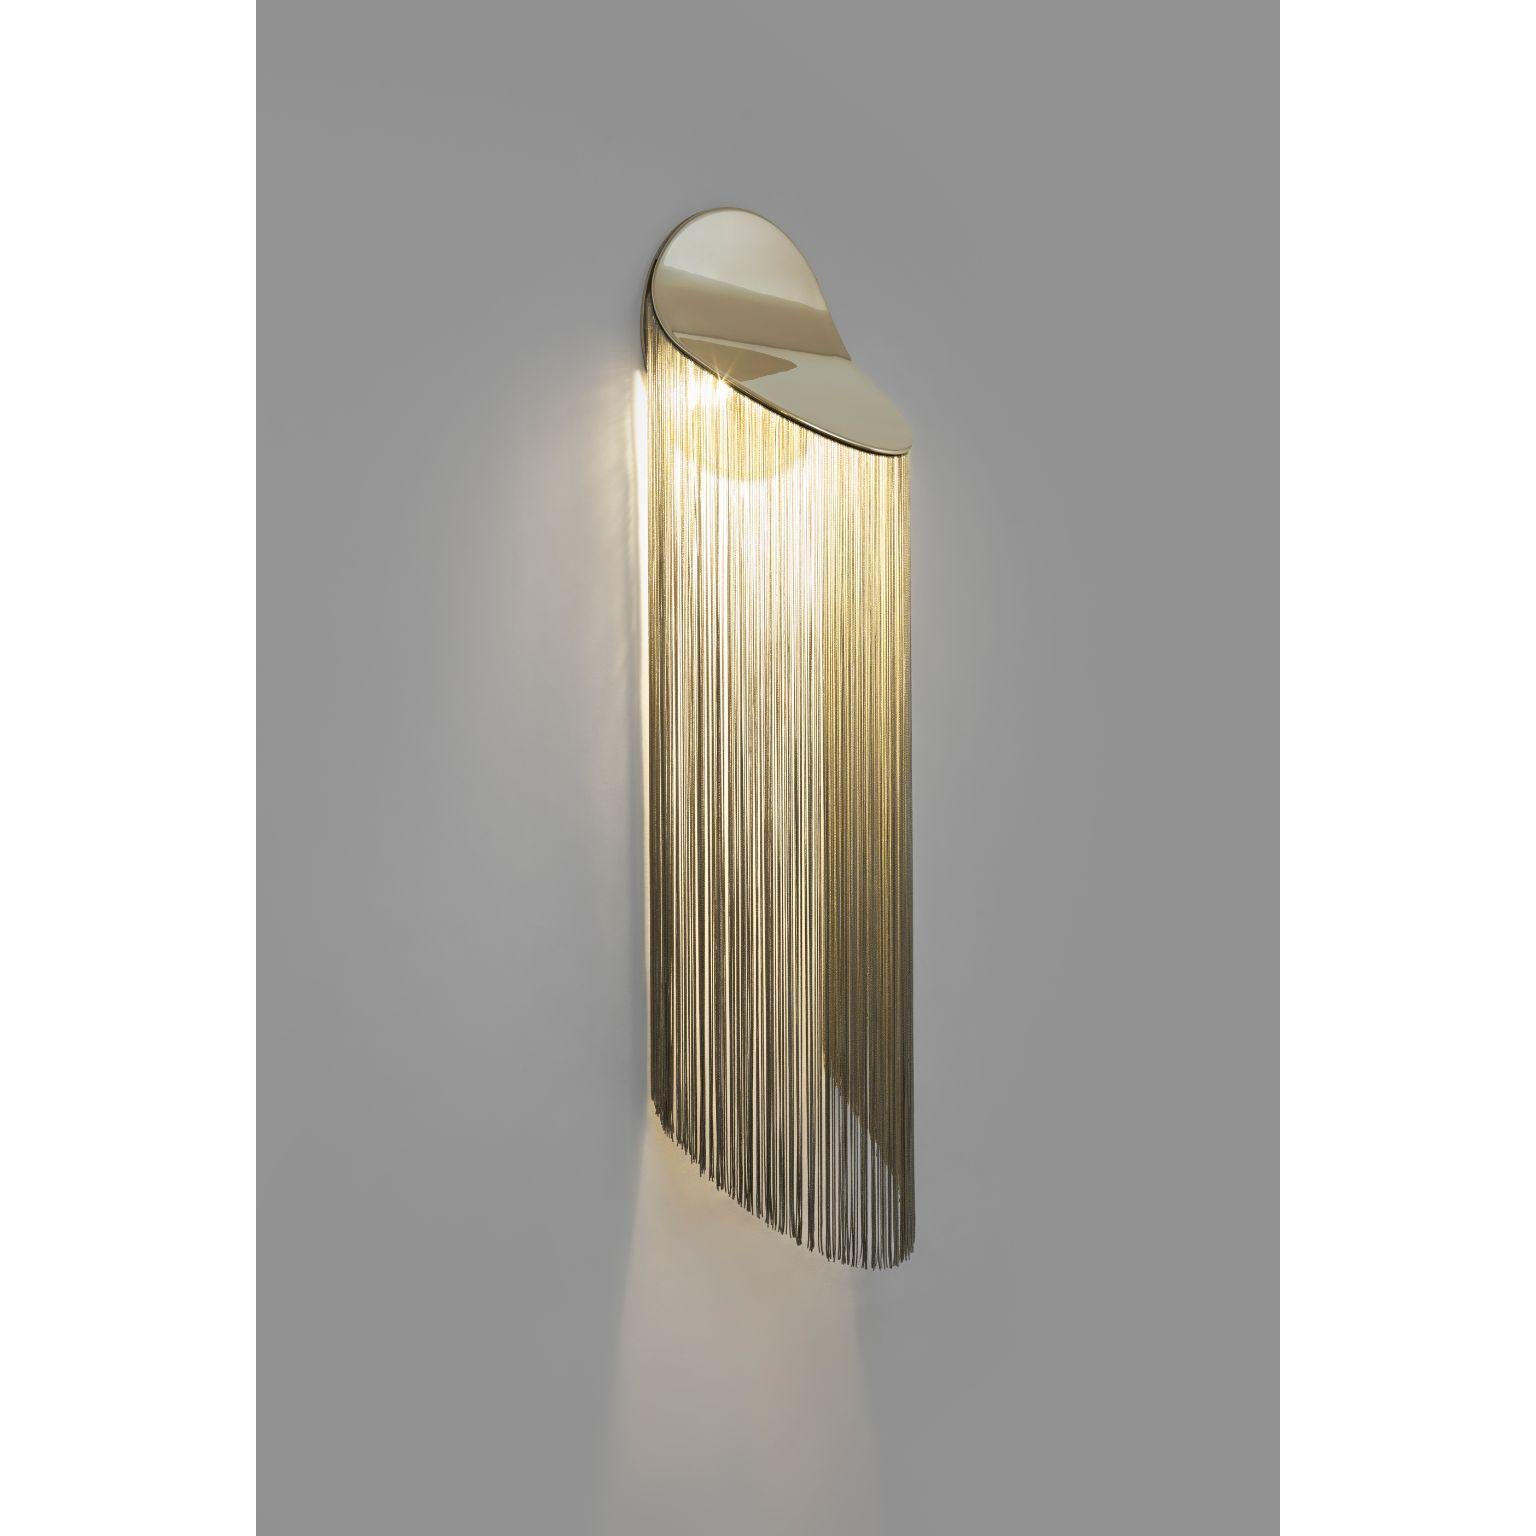 Cé wall lamp by Studio d'Armes
Design by Alexandre Joncas
Dimensions: 25 x 20 x H 100 cm
Materials: 12k Gold Plated Steel, Rayon fringes offered in different colors 
 
Design by Alexandre Joncas
Cé jostles the obvious association between